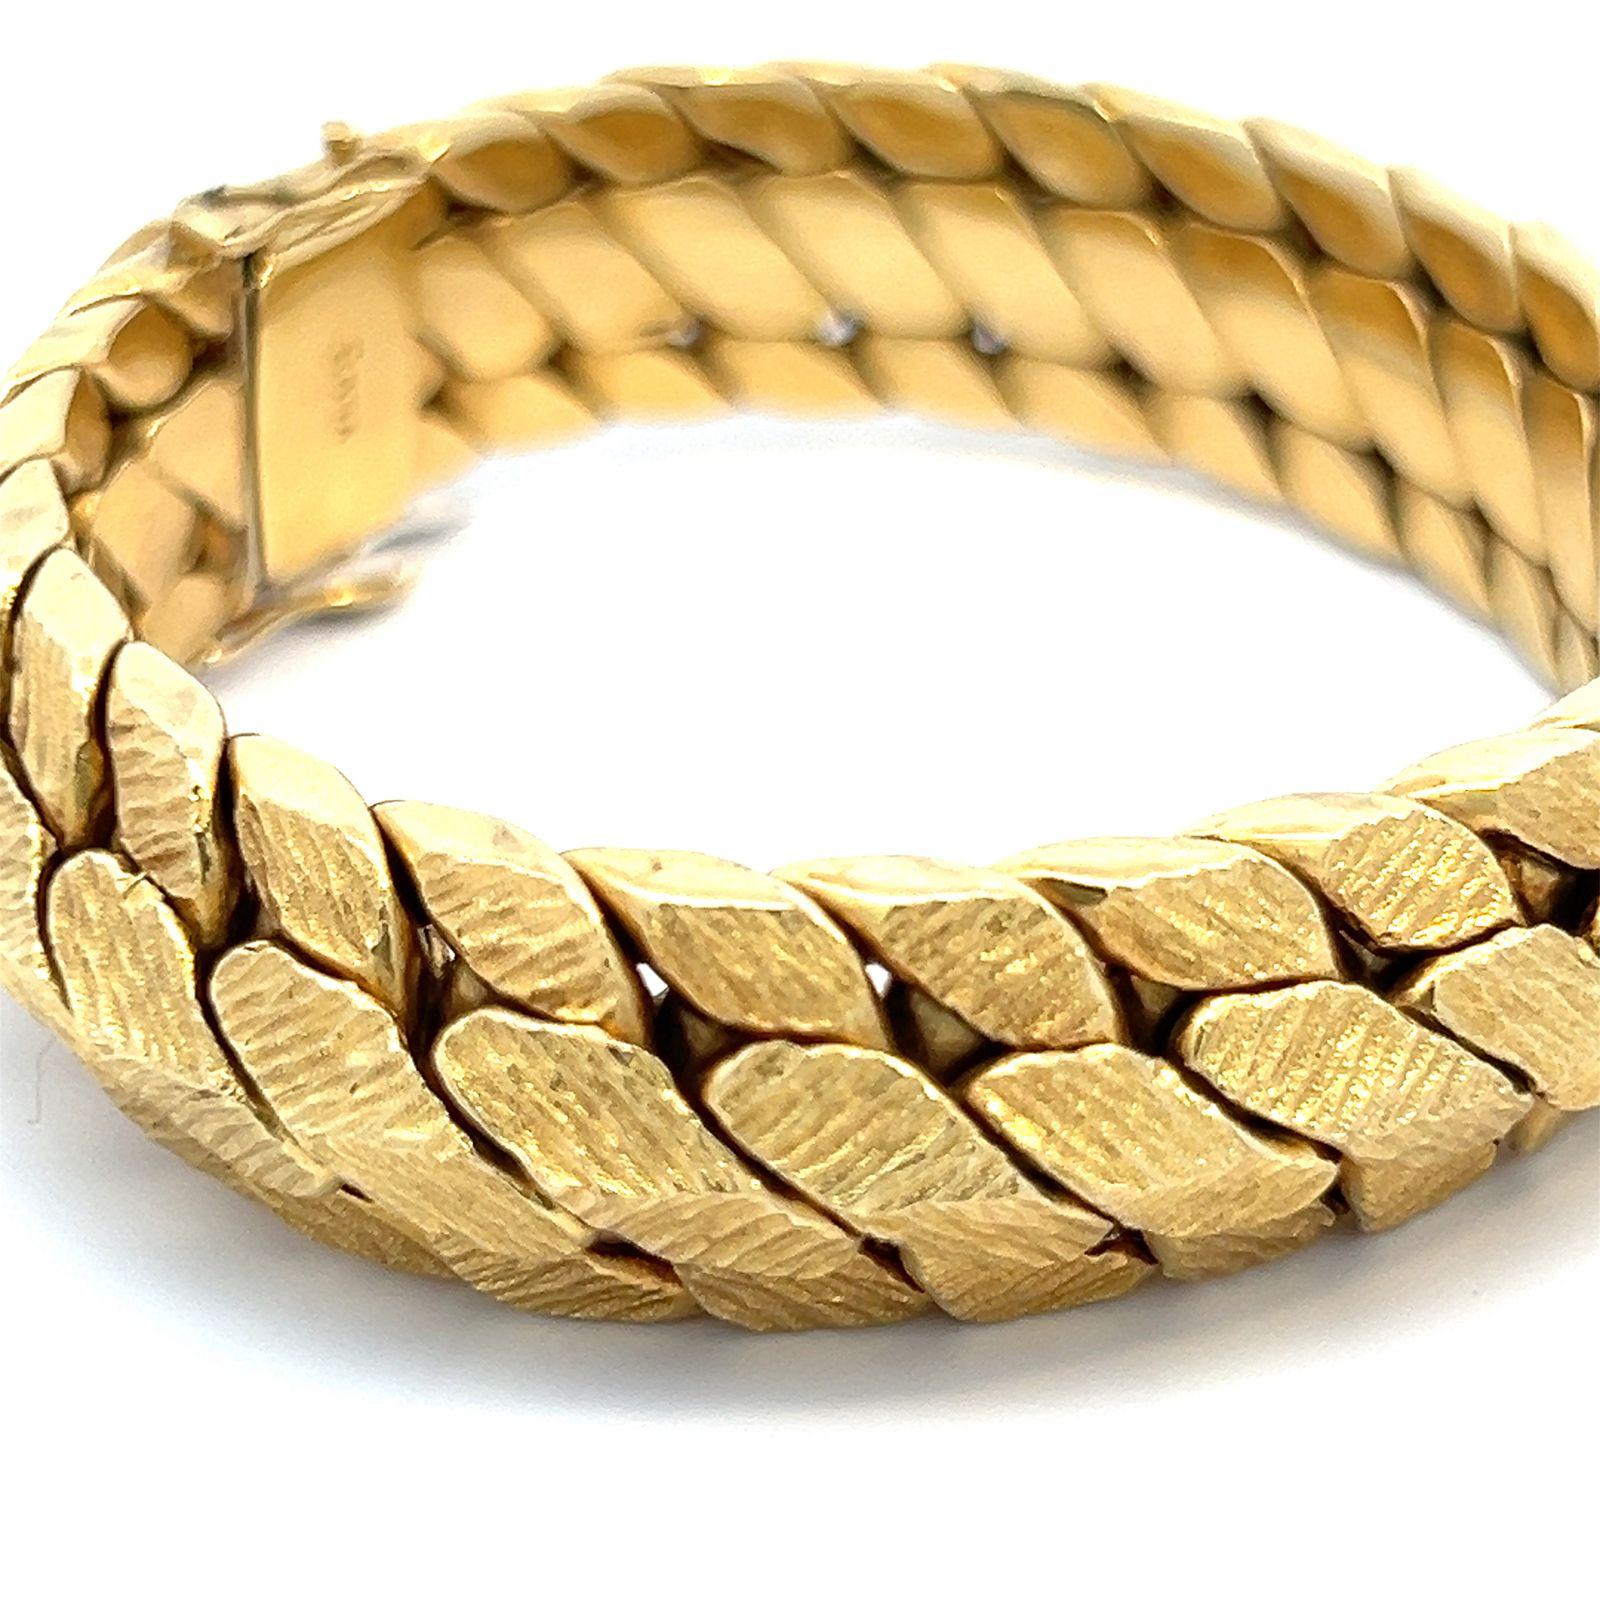 Solid Gold Woven Florentine Chain Diamond Bracelet Retro  In Excellent Condition For Sale In Beverly Hills, CA